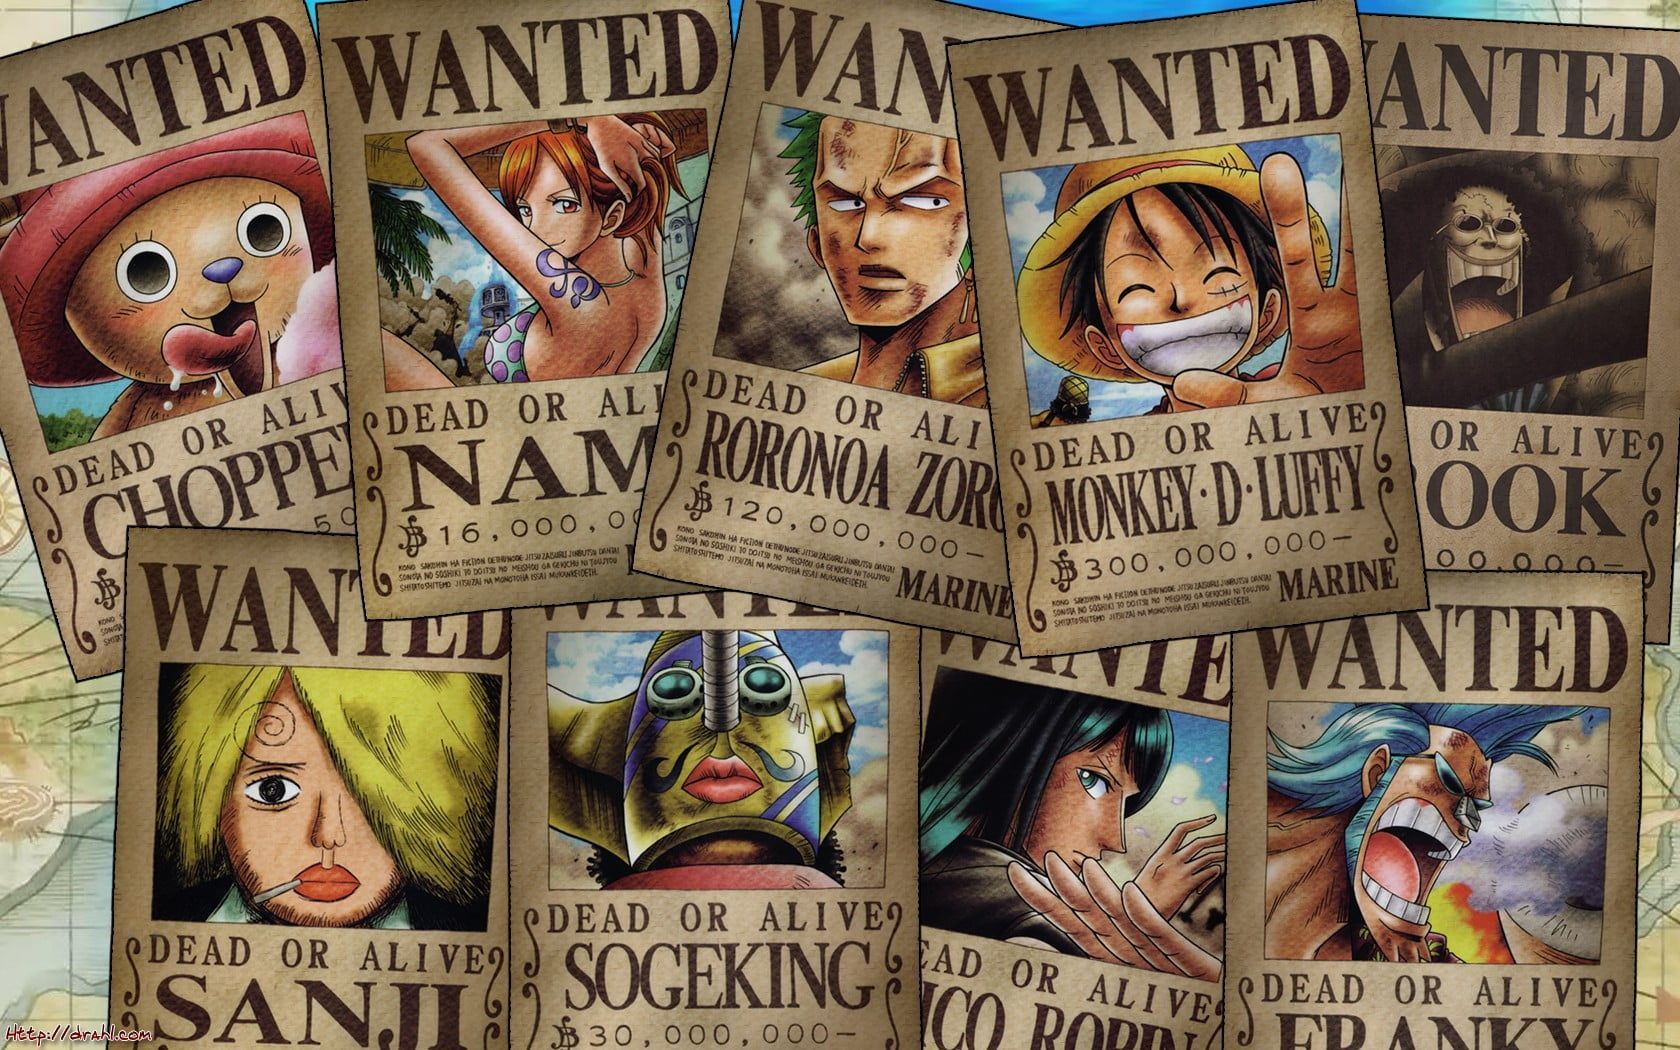 One Piece Wanted Poster Wallpaper Free One Piece Wanted Poster Background